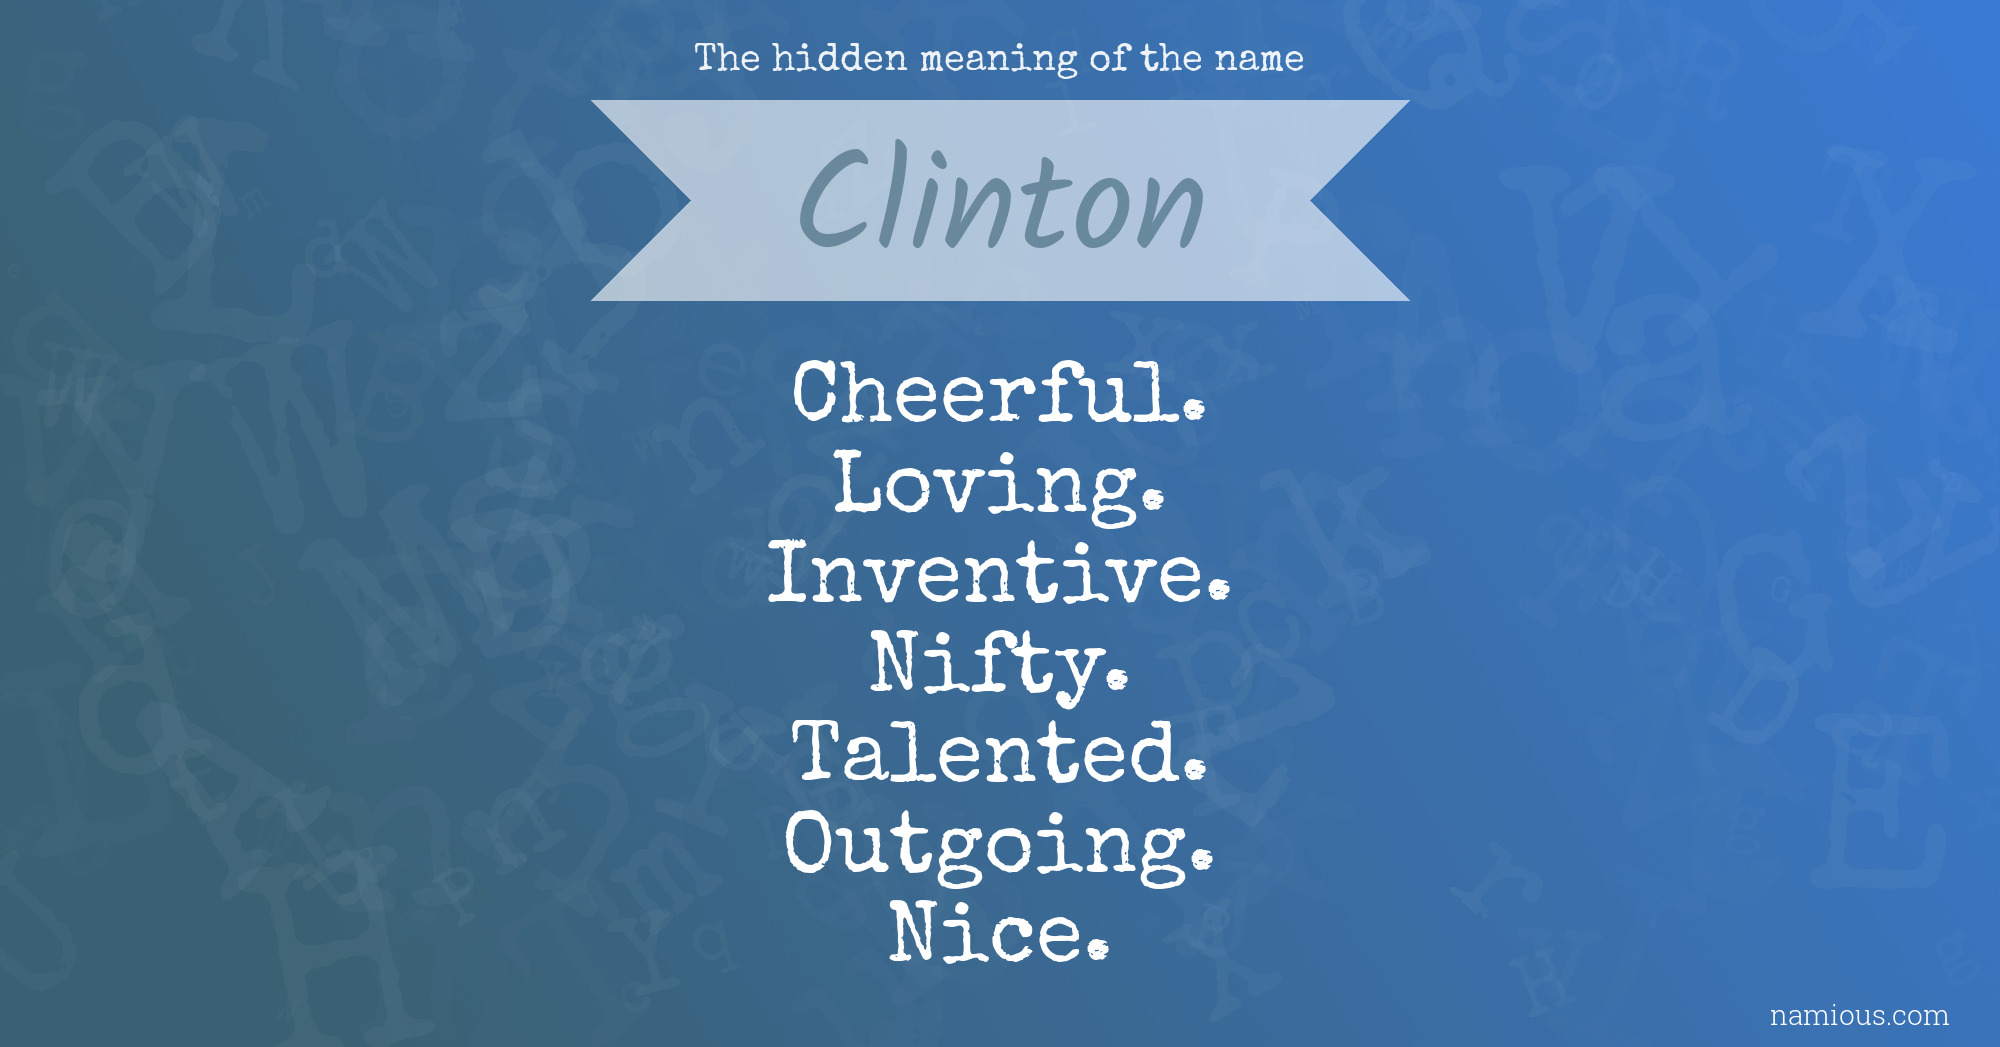 The hidden meaning of the name Clinton